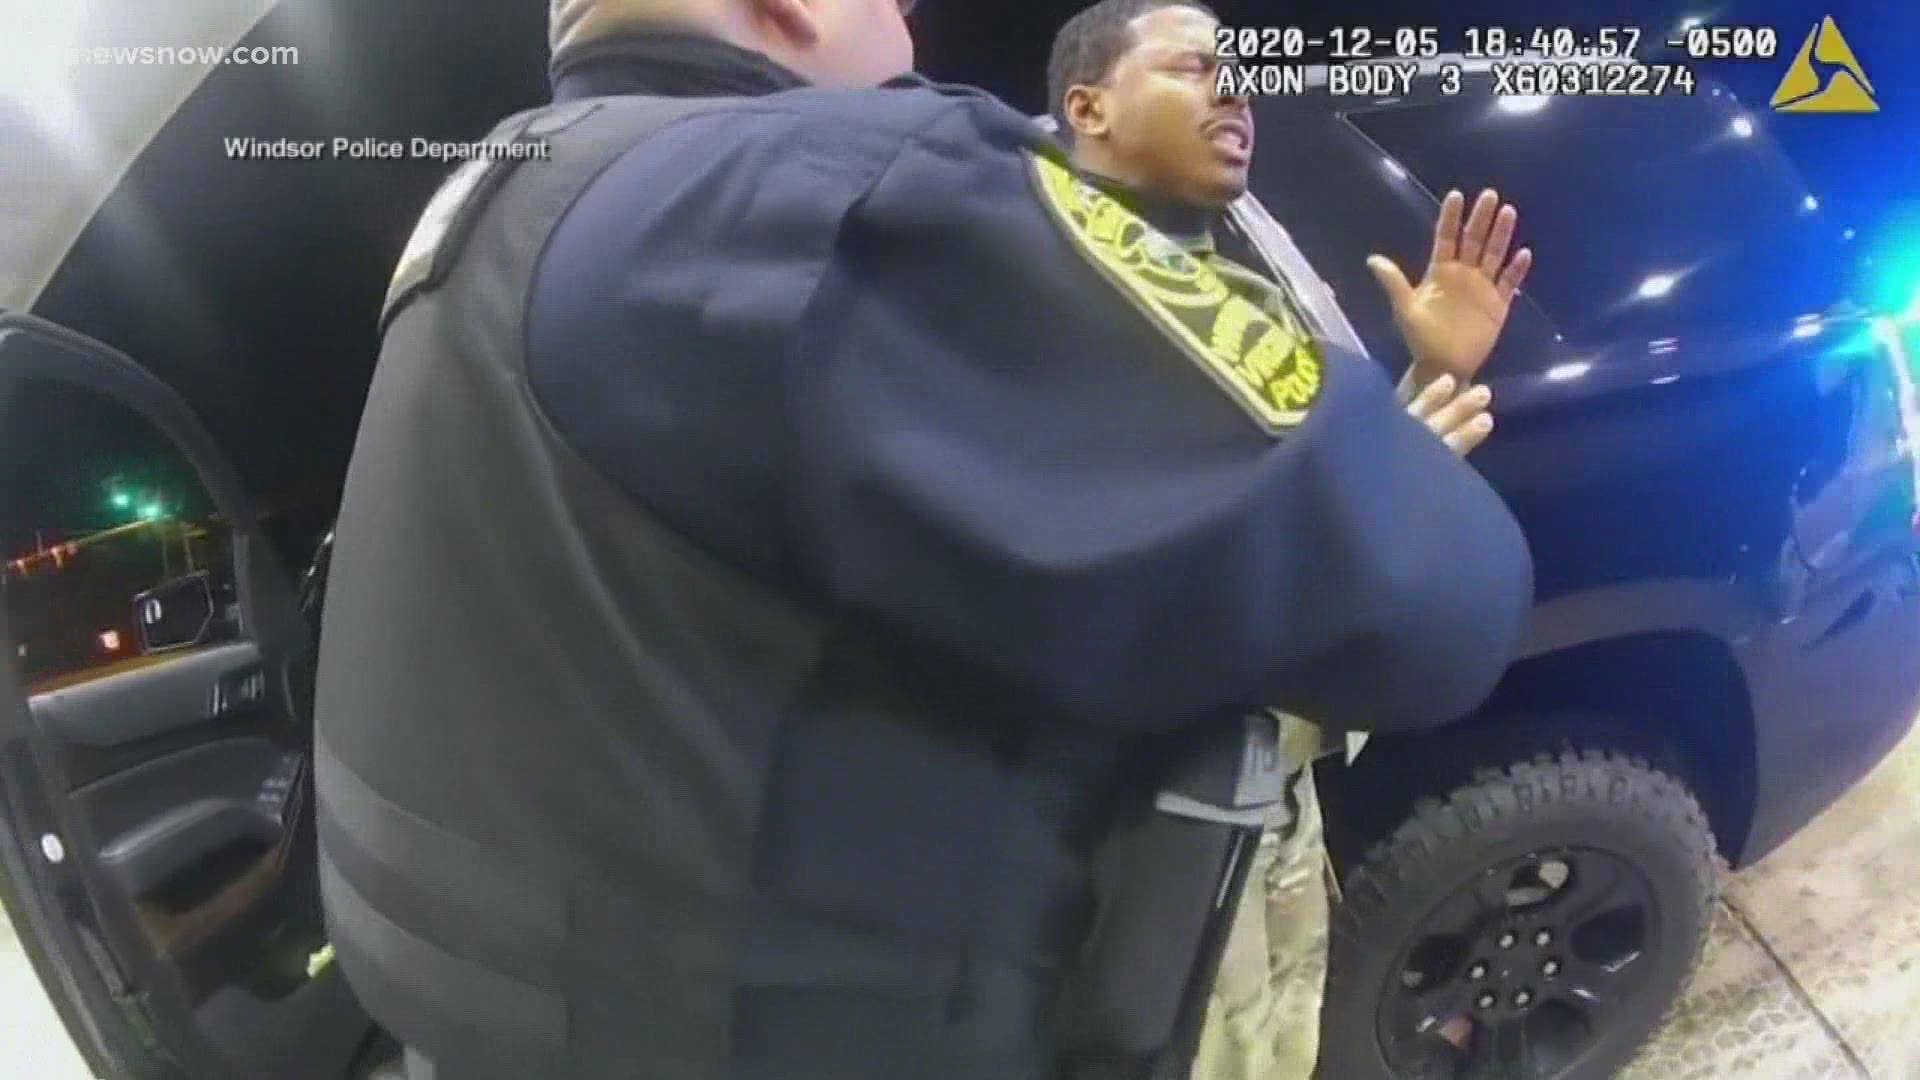 Body camera footage of the stop has spread online, triggering a nationwide outcry for action and transparency.